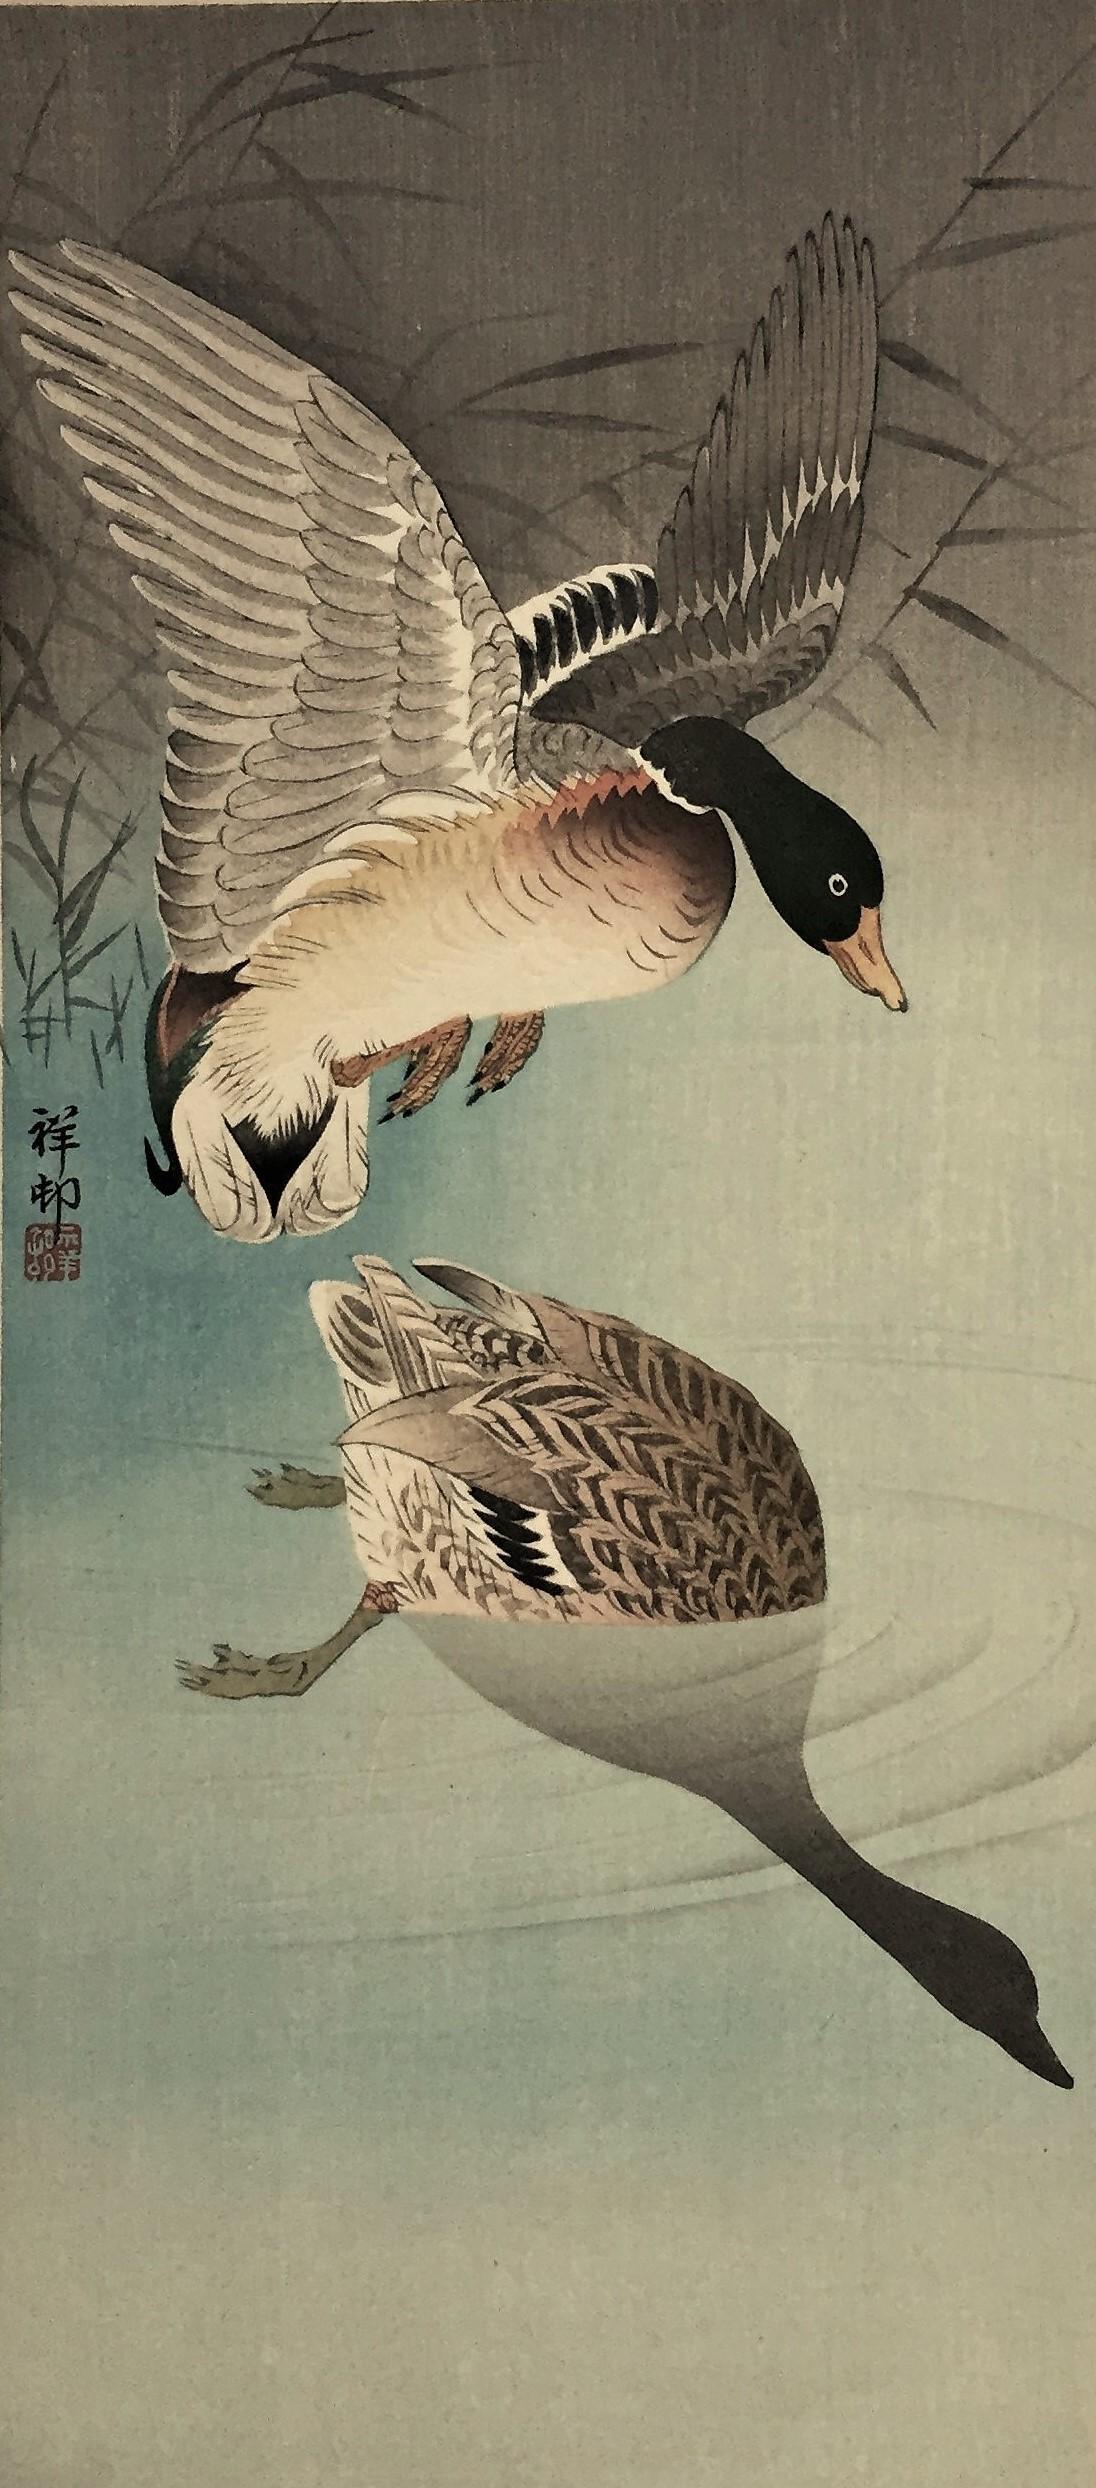 Ohara Koson Landscape Print - Two Wild Ducks in Flight Above Reeds, a Full Moon Behind.